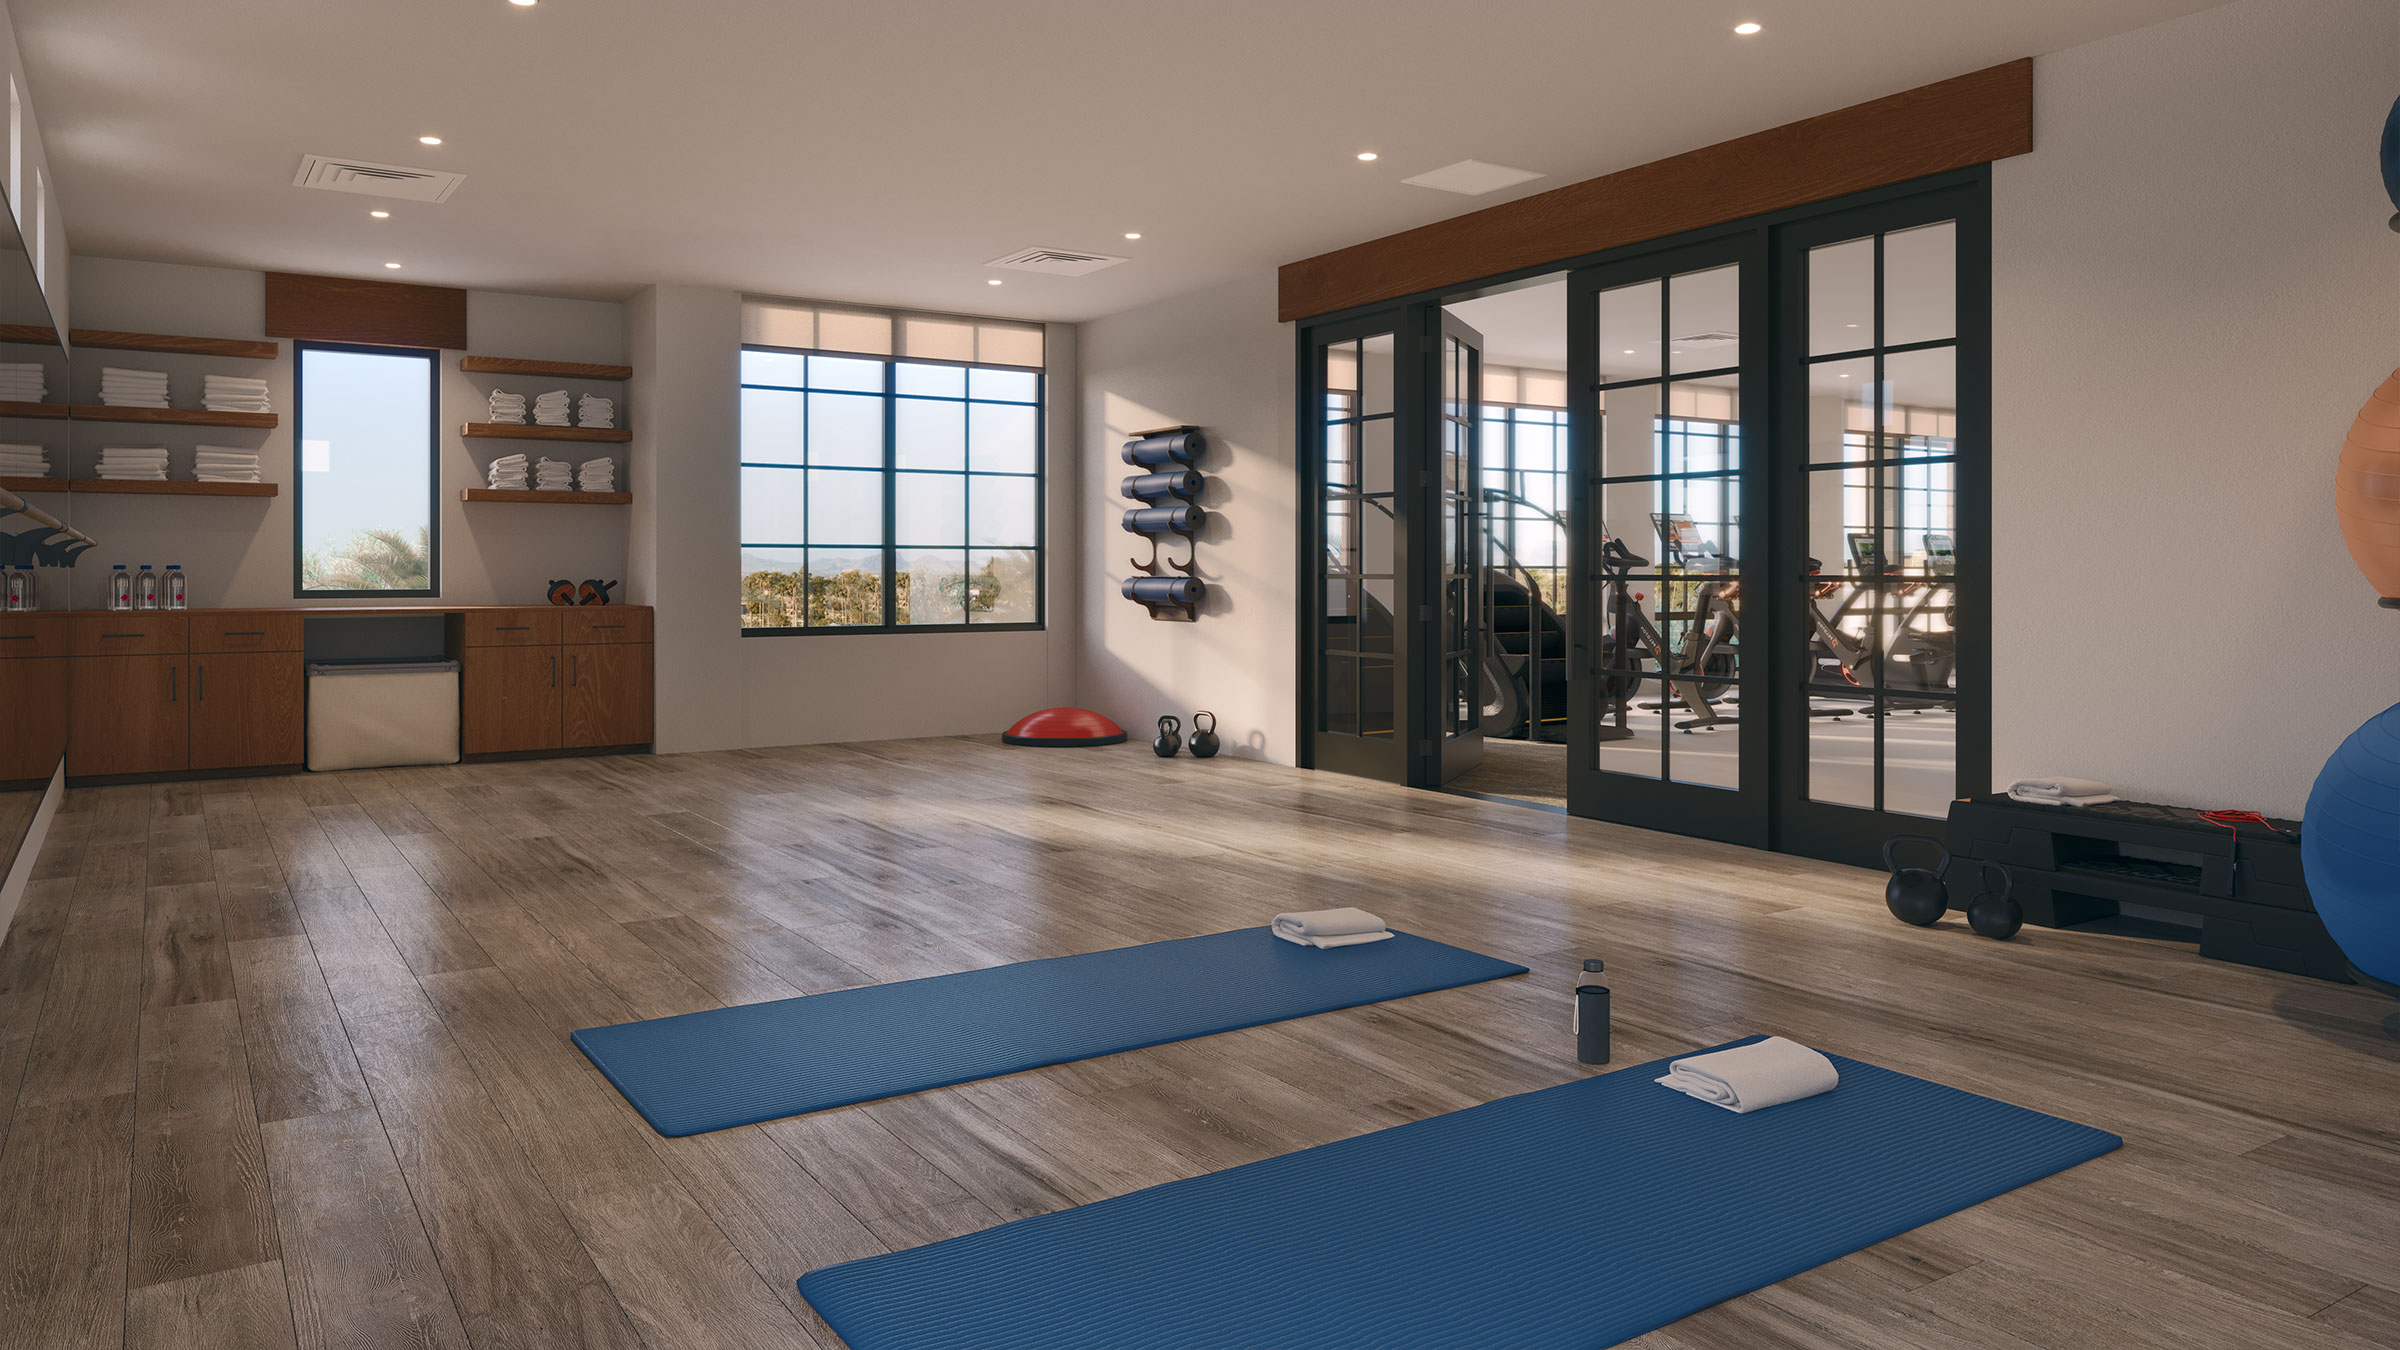 Enjoy yoga, meditation and other classes in the sunlit movement studio.